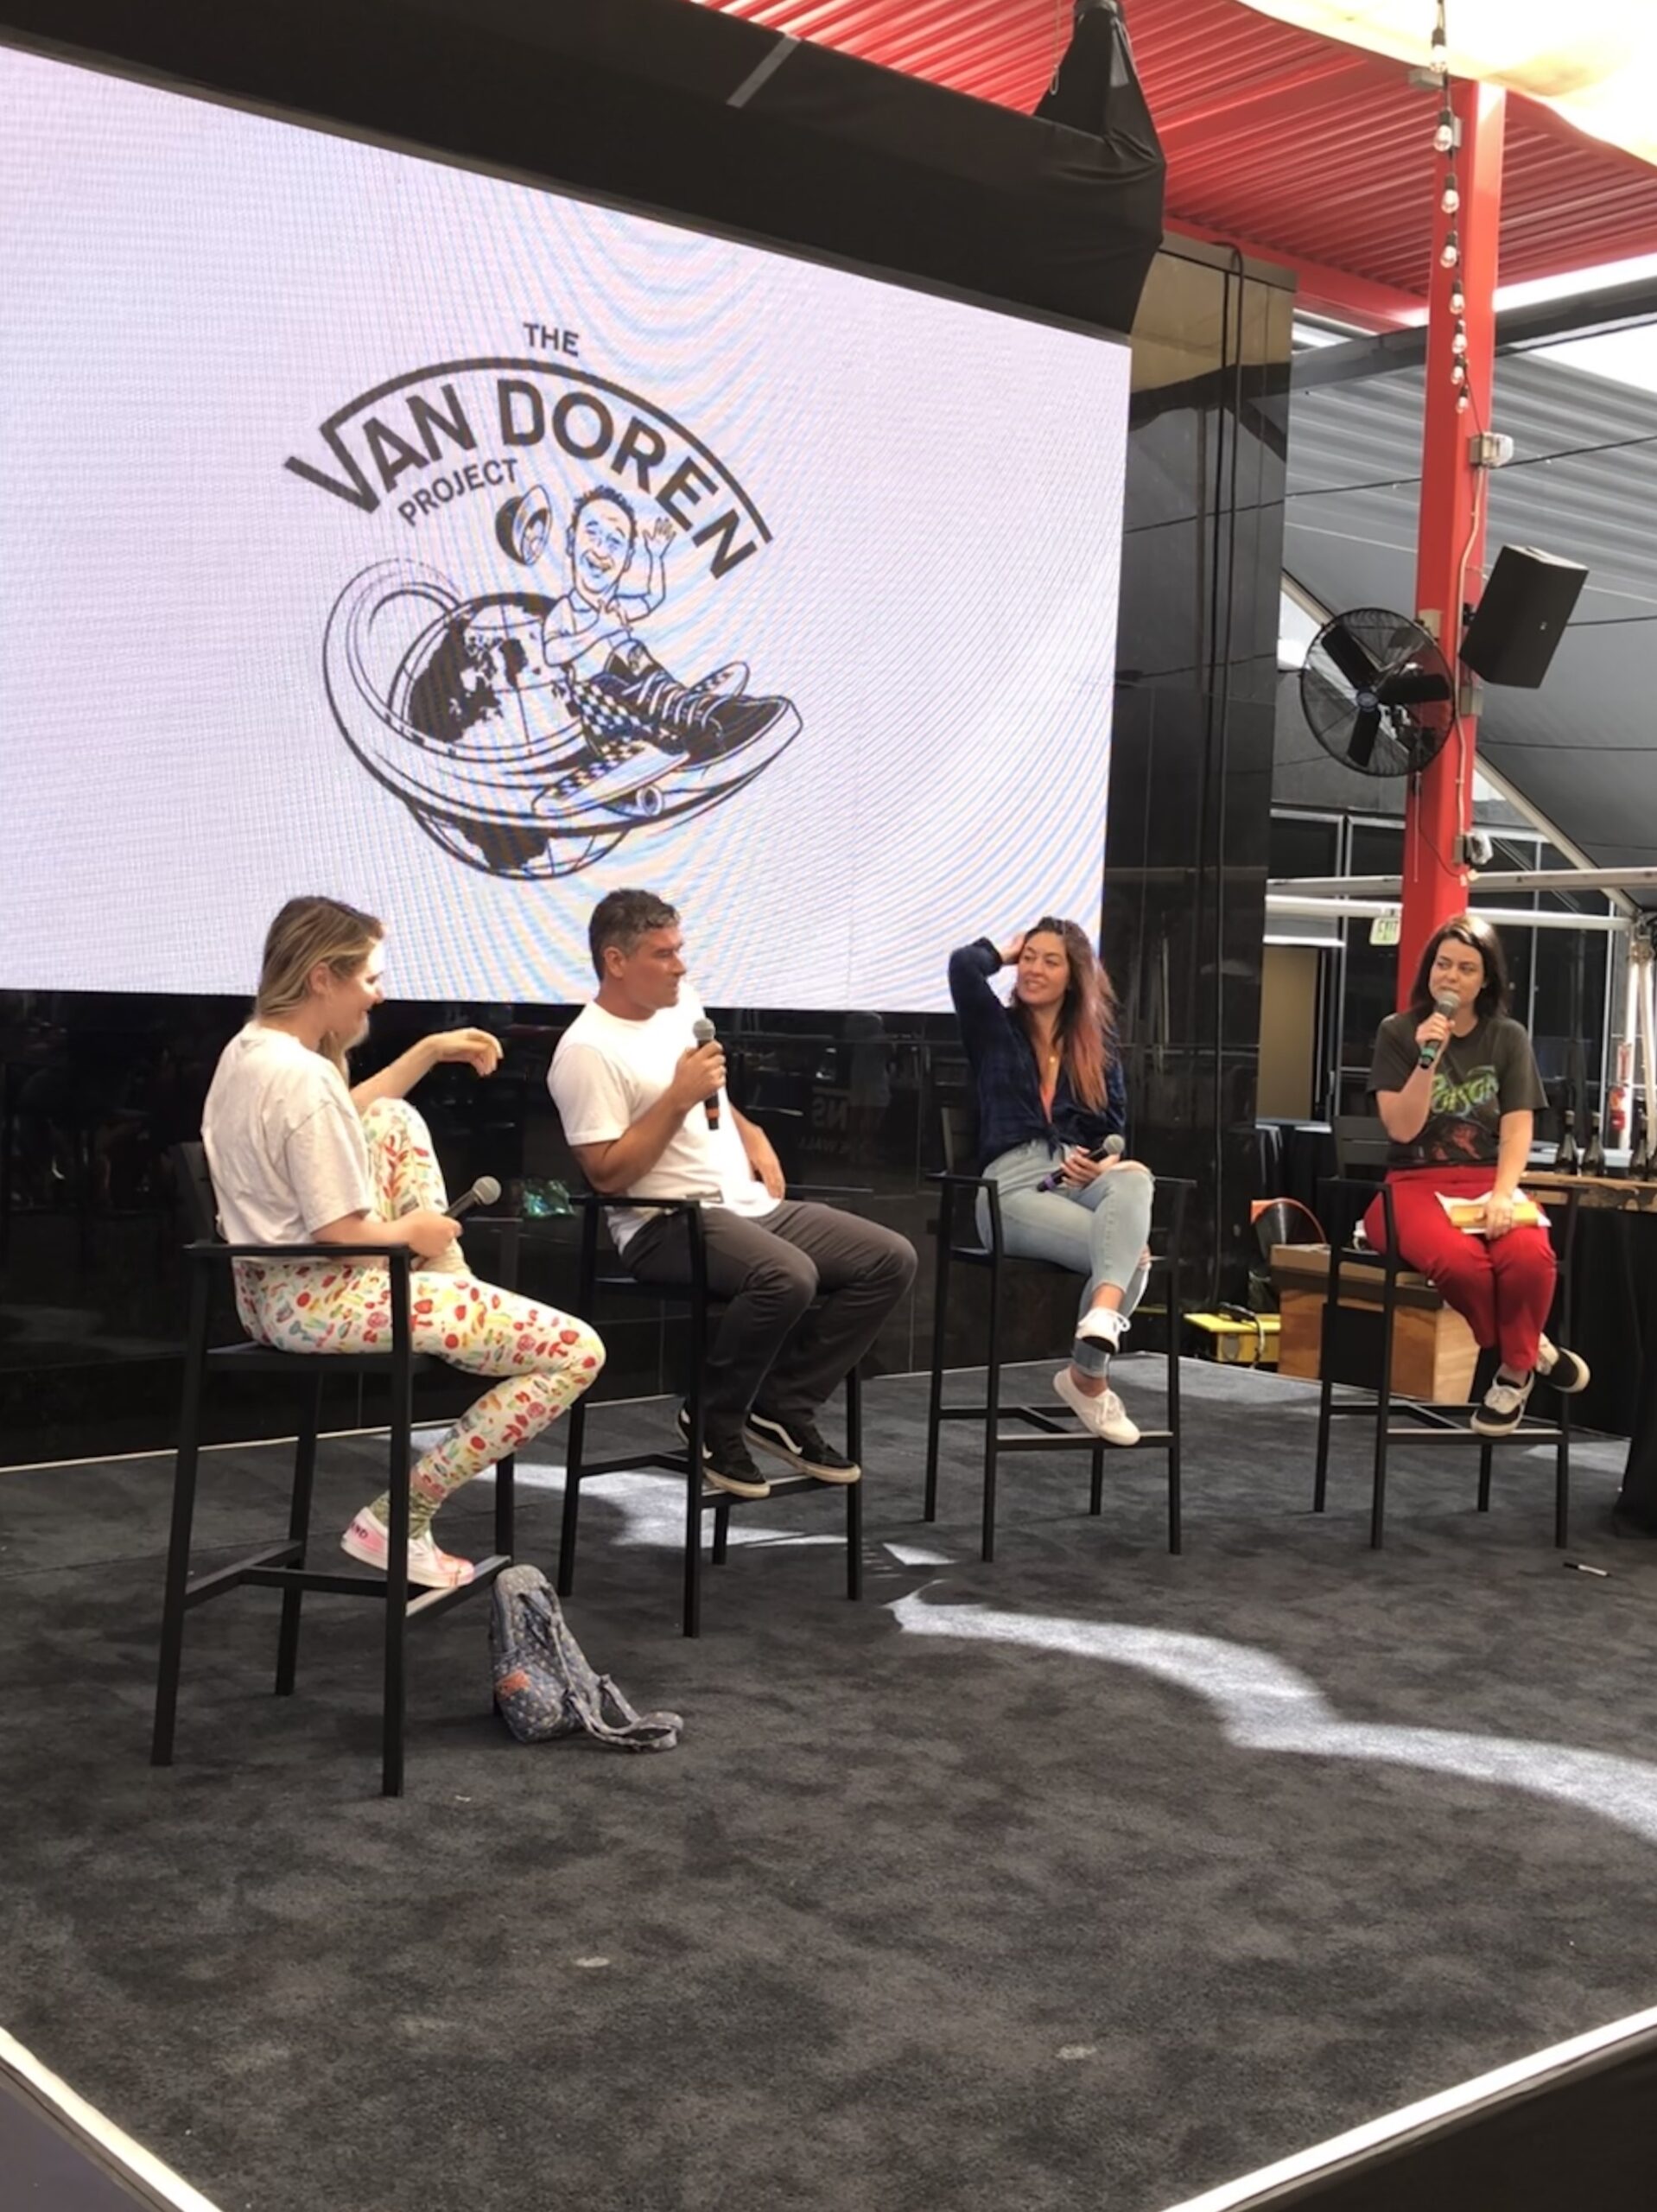 Four people on stage for The Van Doren Project panel discussion